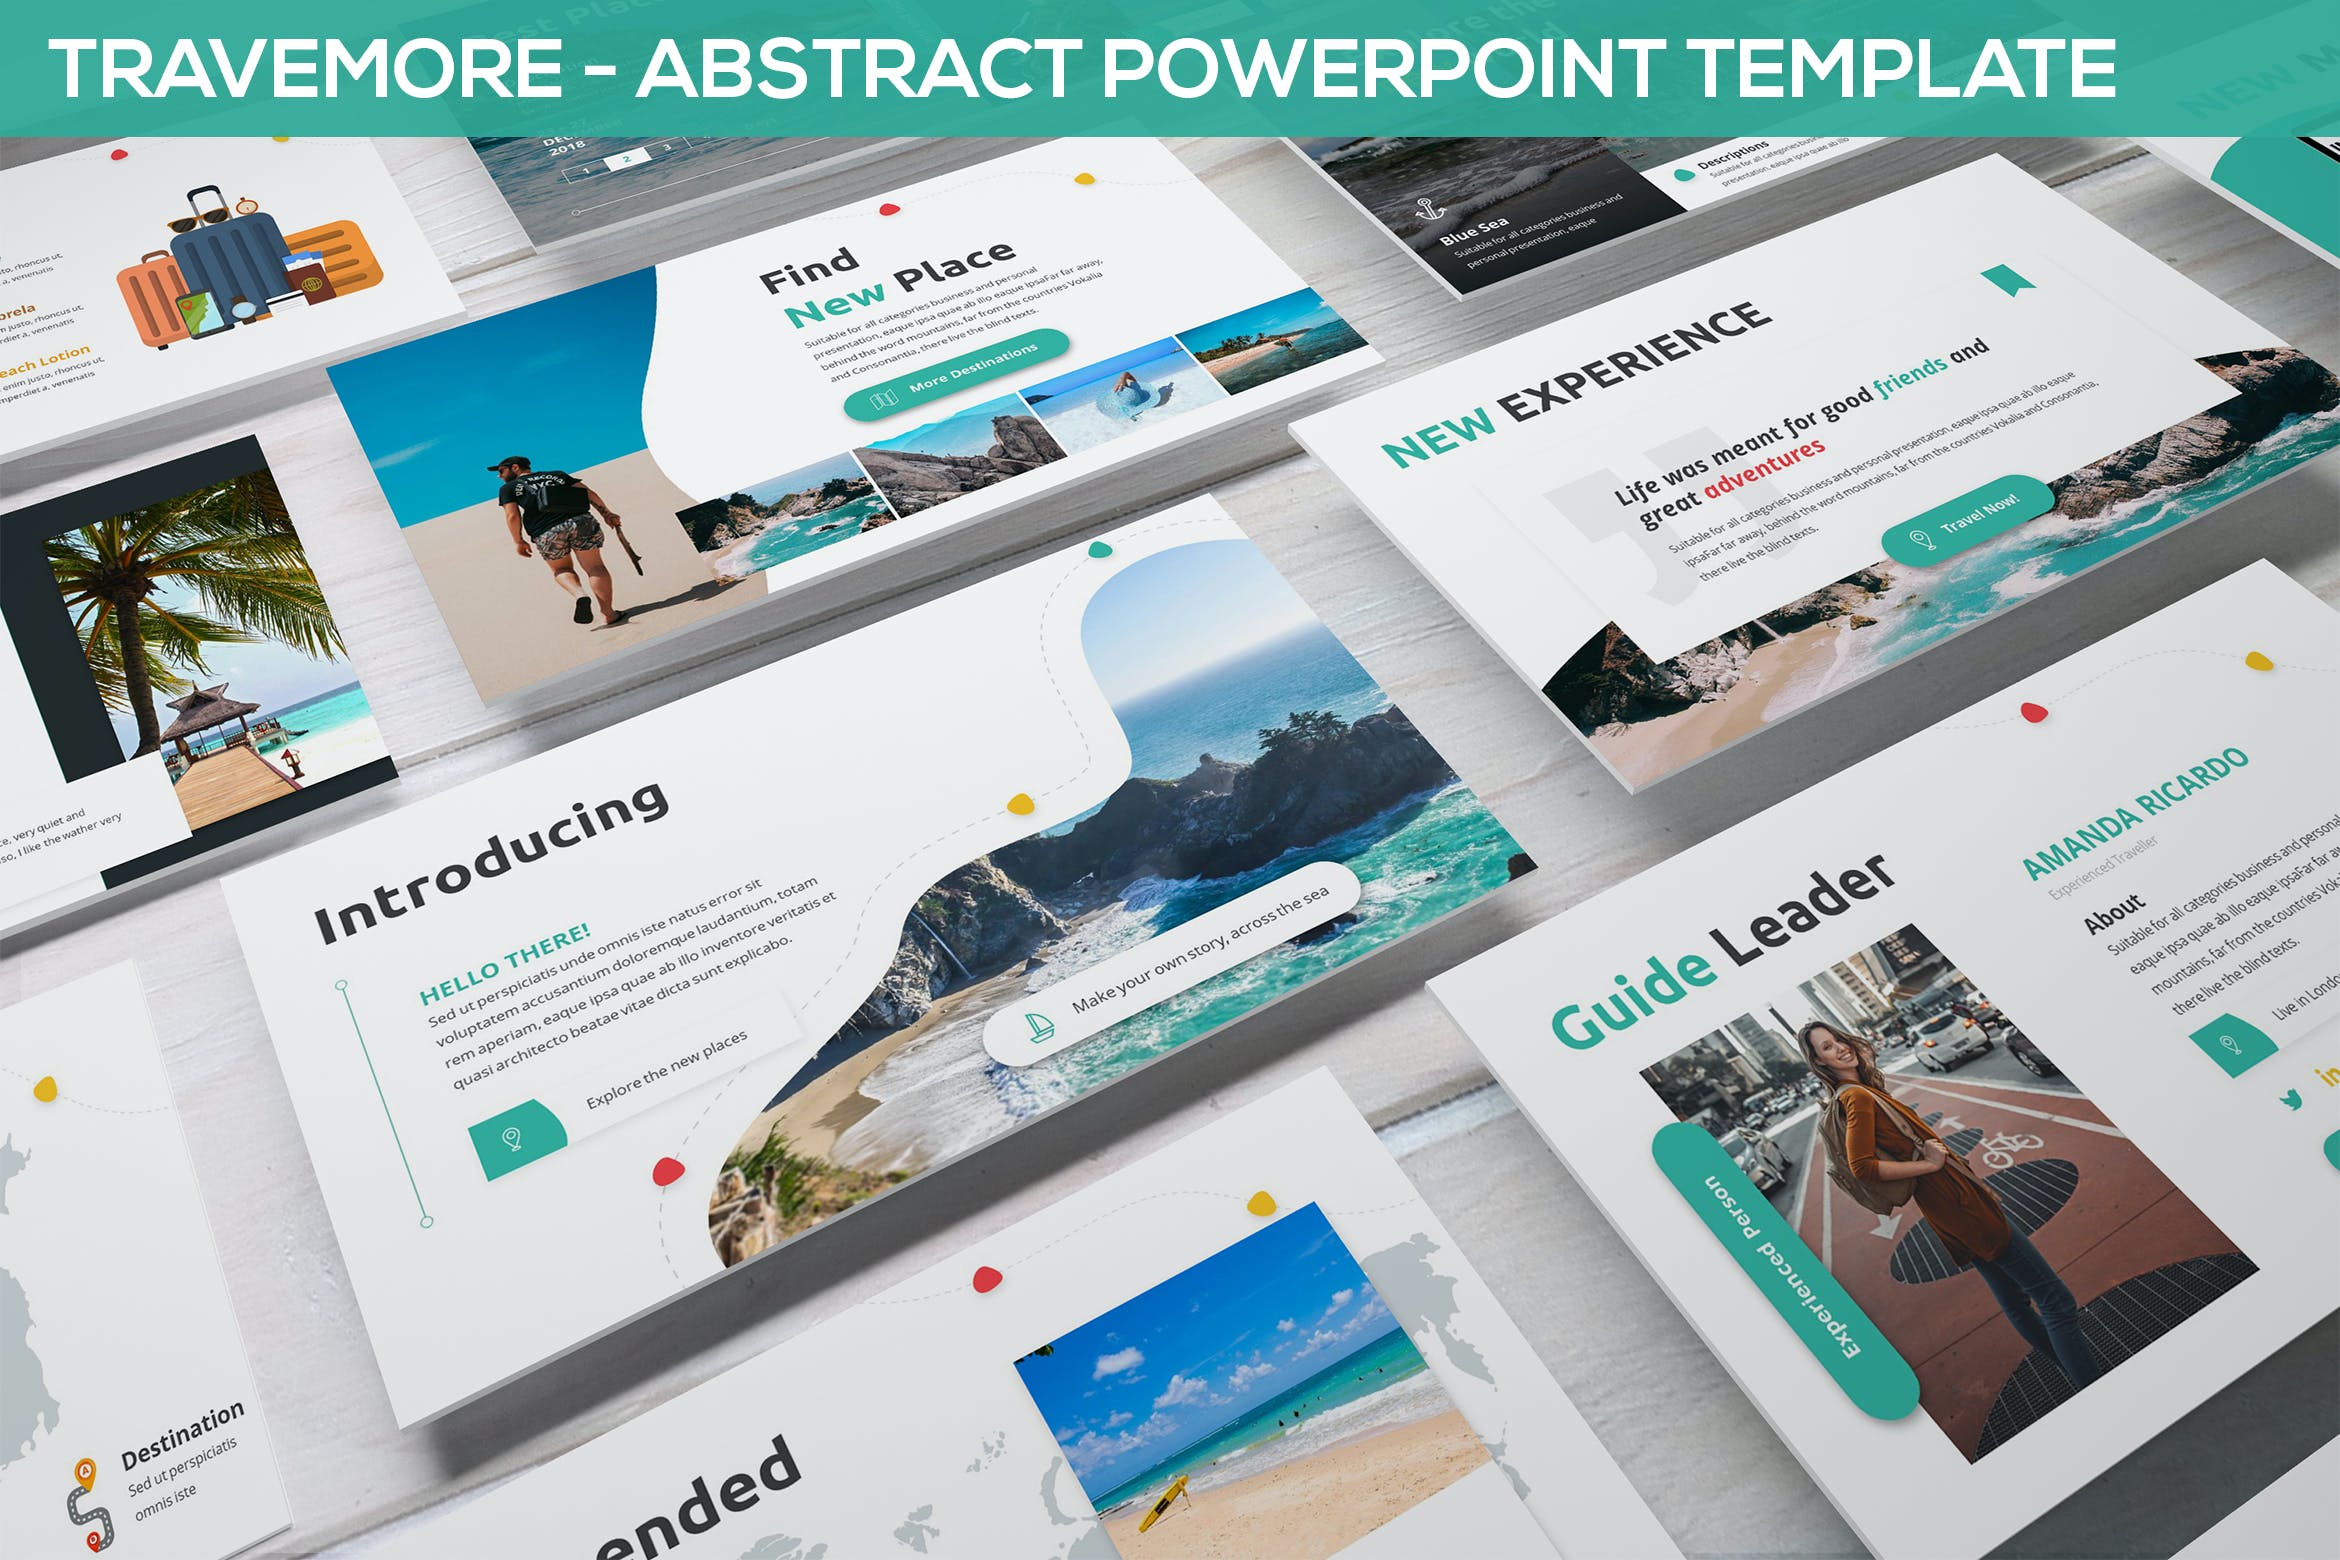 Cover image of Travemore - Abstract Powerpoint Template.